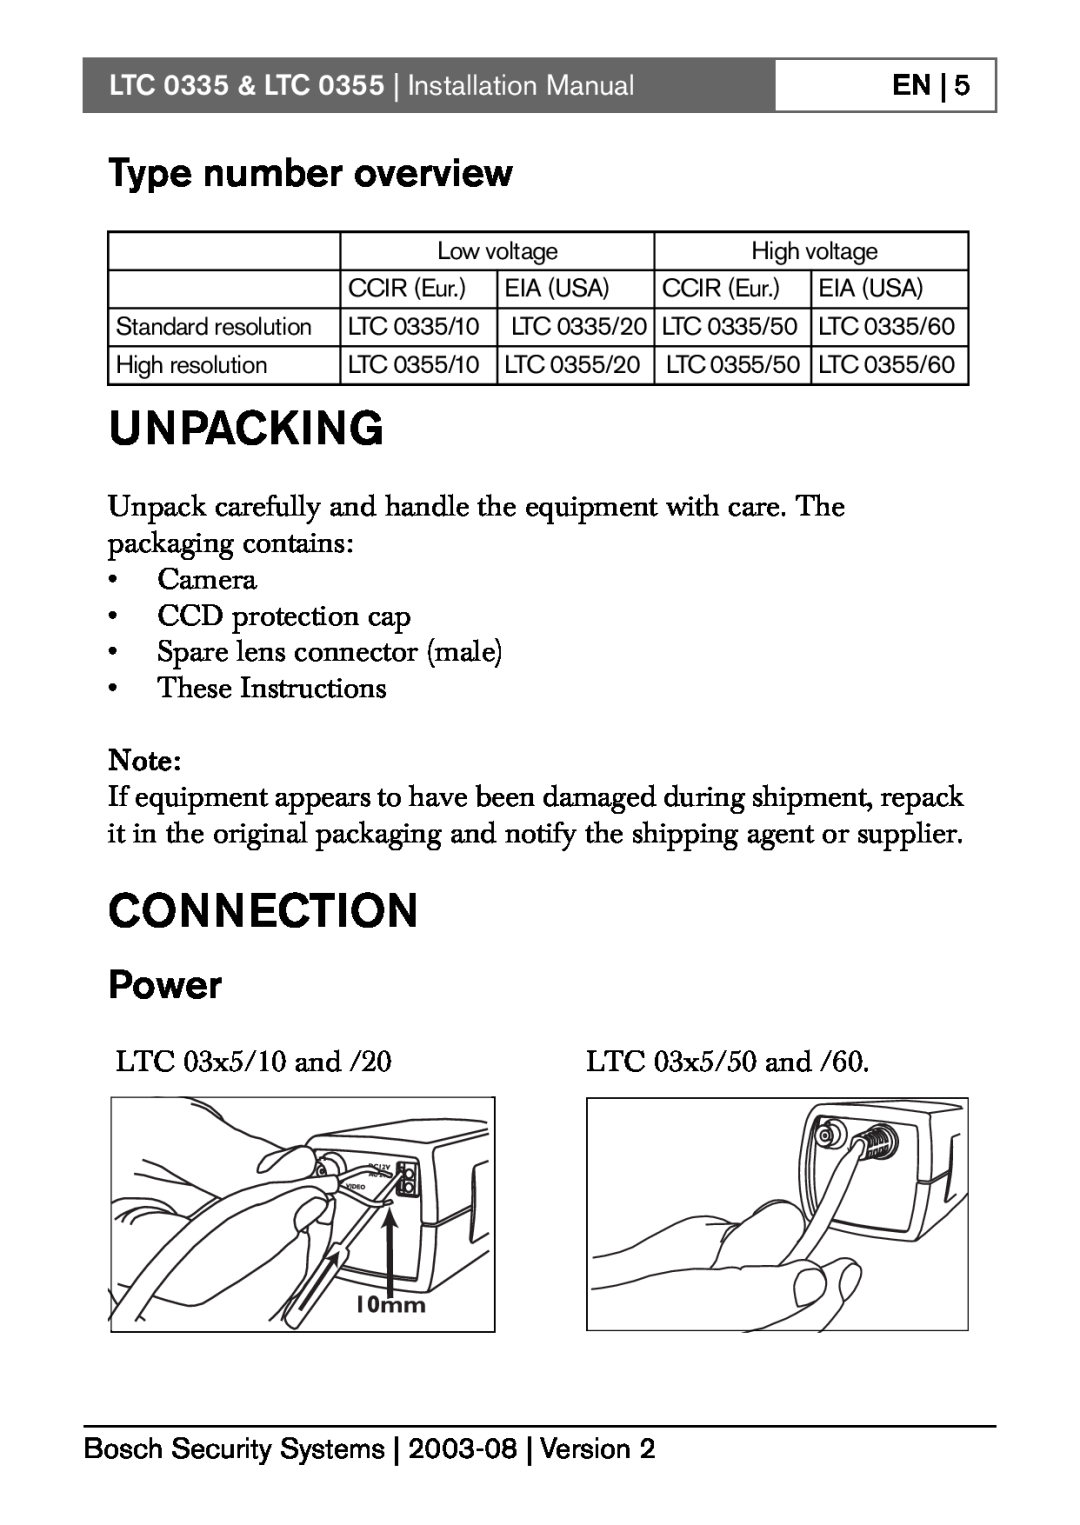 Bosch Appliances Unpacking, Connection, Type number overview, Power, LTC 0335 & LTC 0355 Installation Manual 